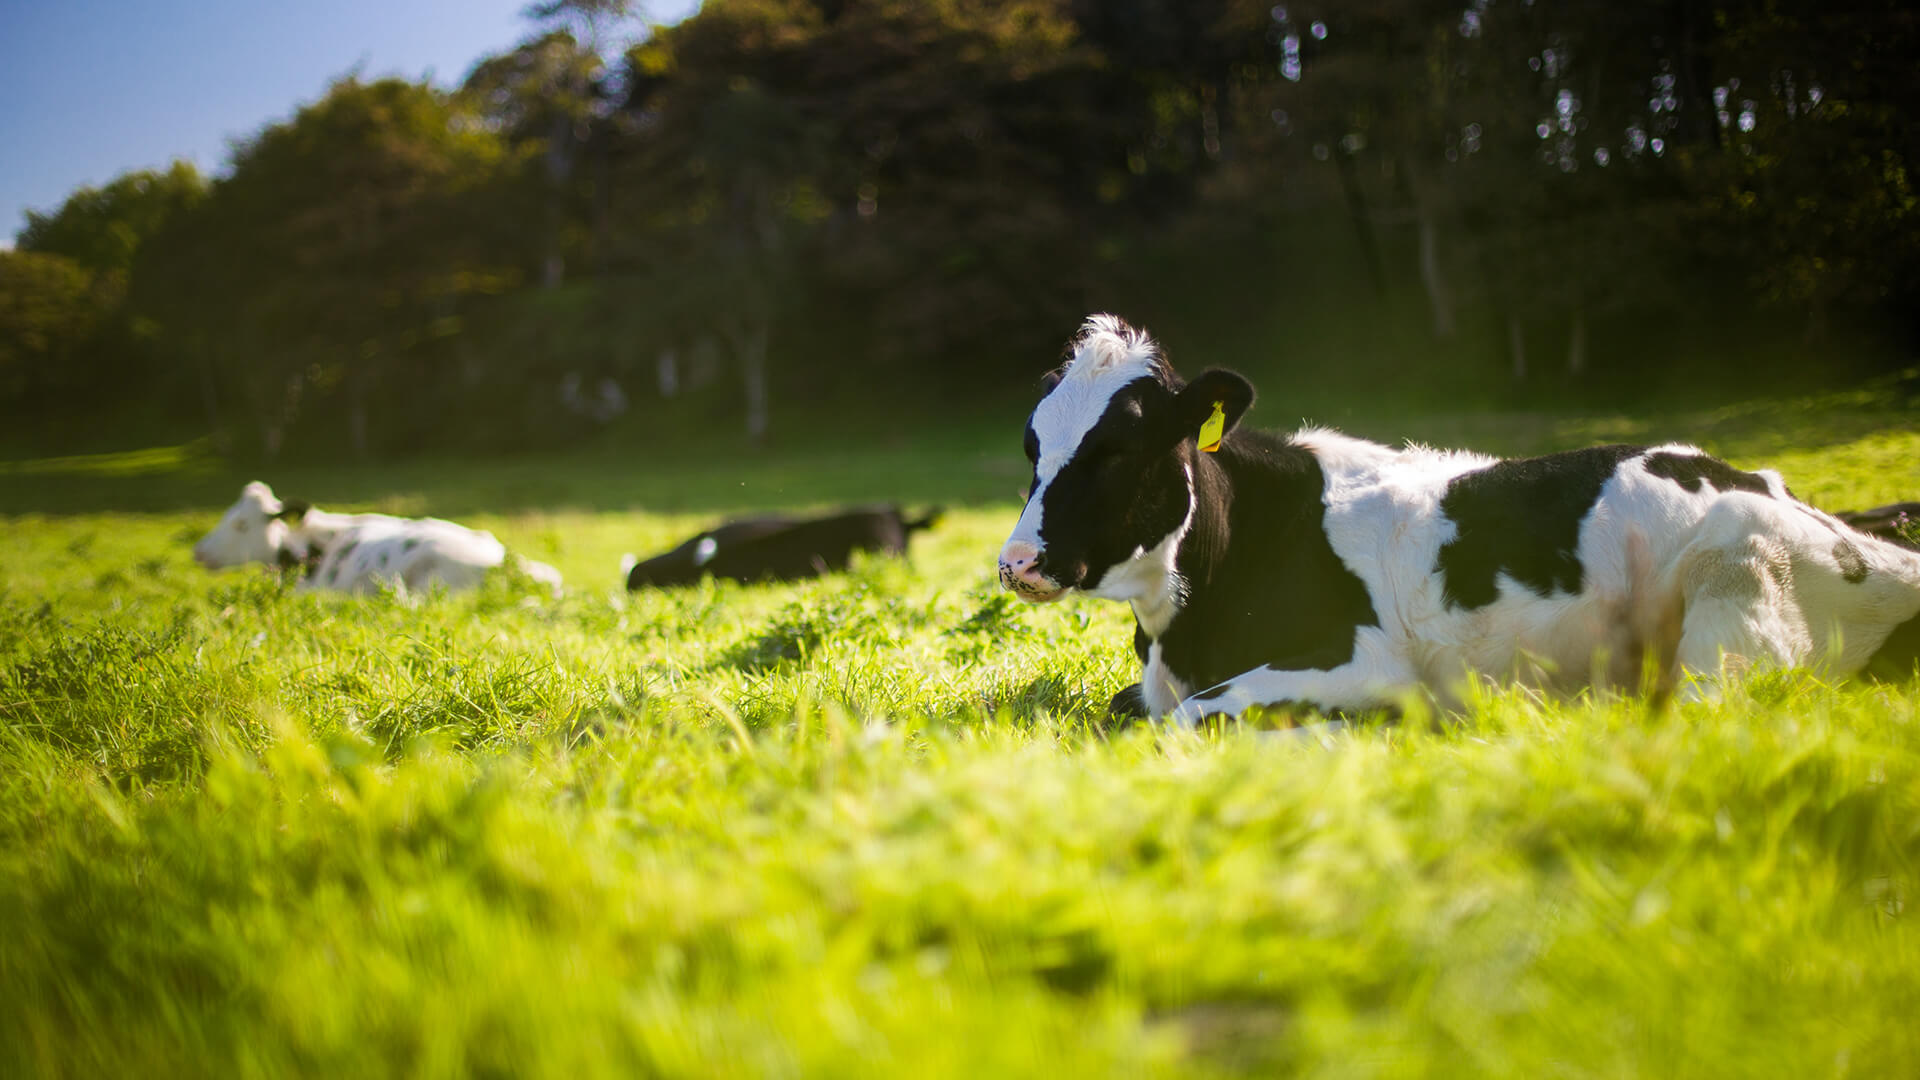 Grass fed irish dairy cows are used to supply products for Dansko Foods